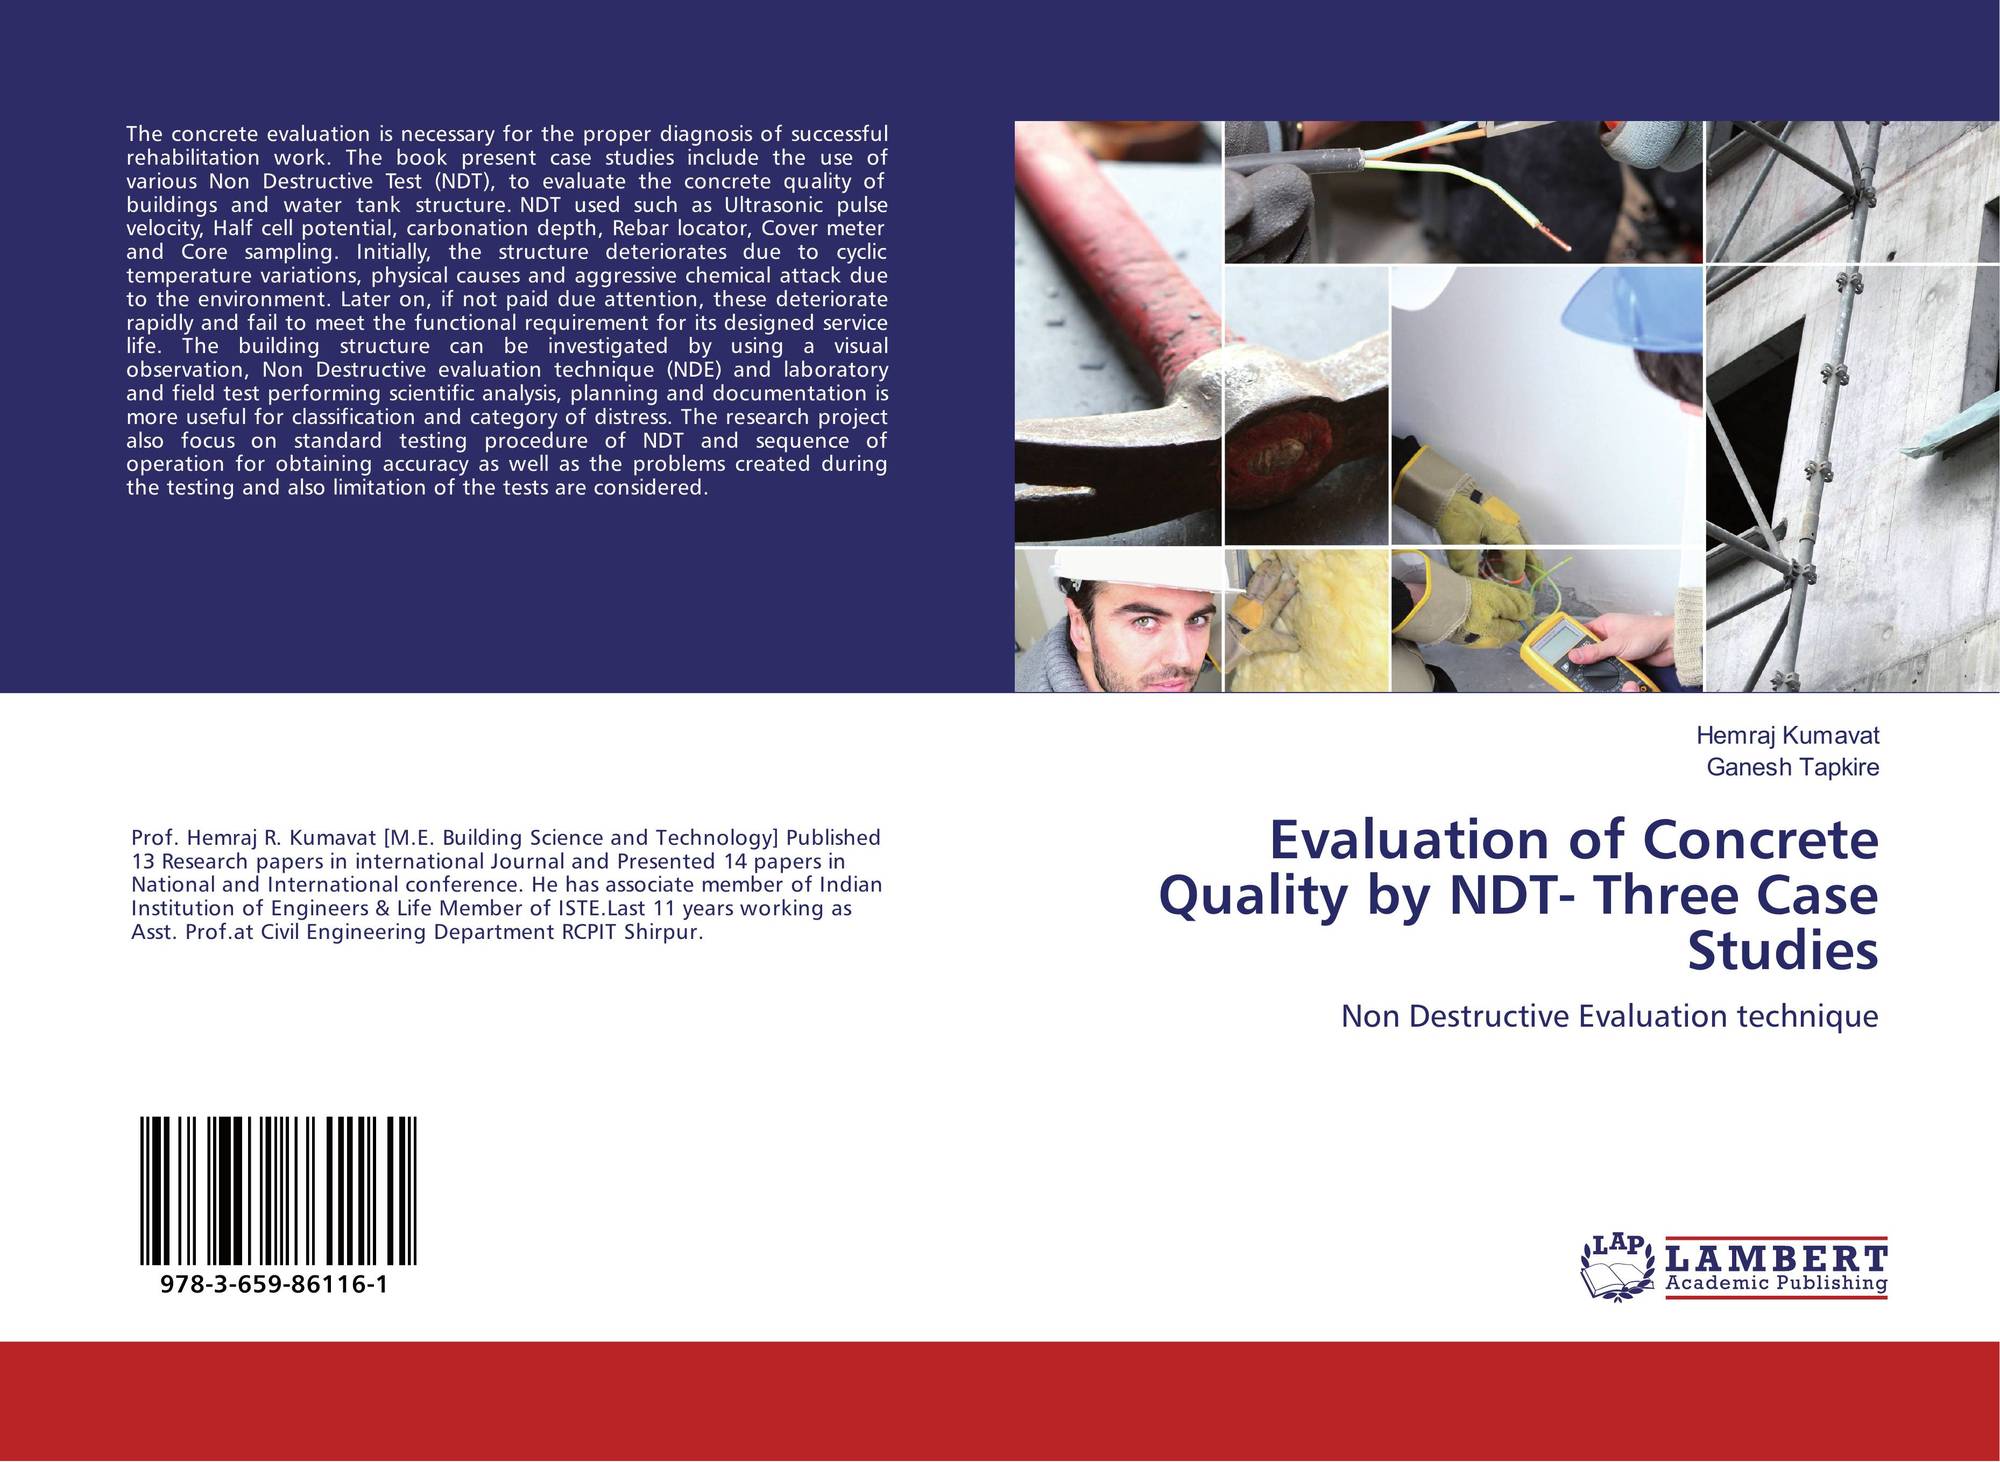 Evaluation of Concrete Quality by NDT- Three Case Studies, 978-3-659